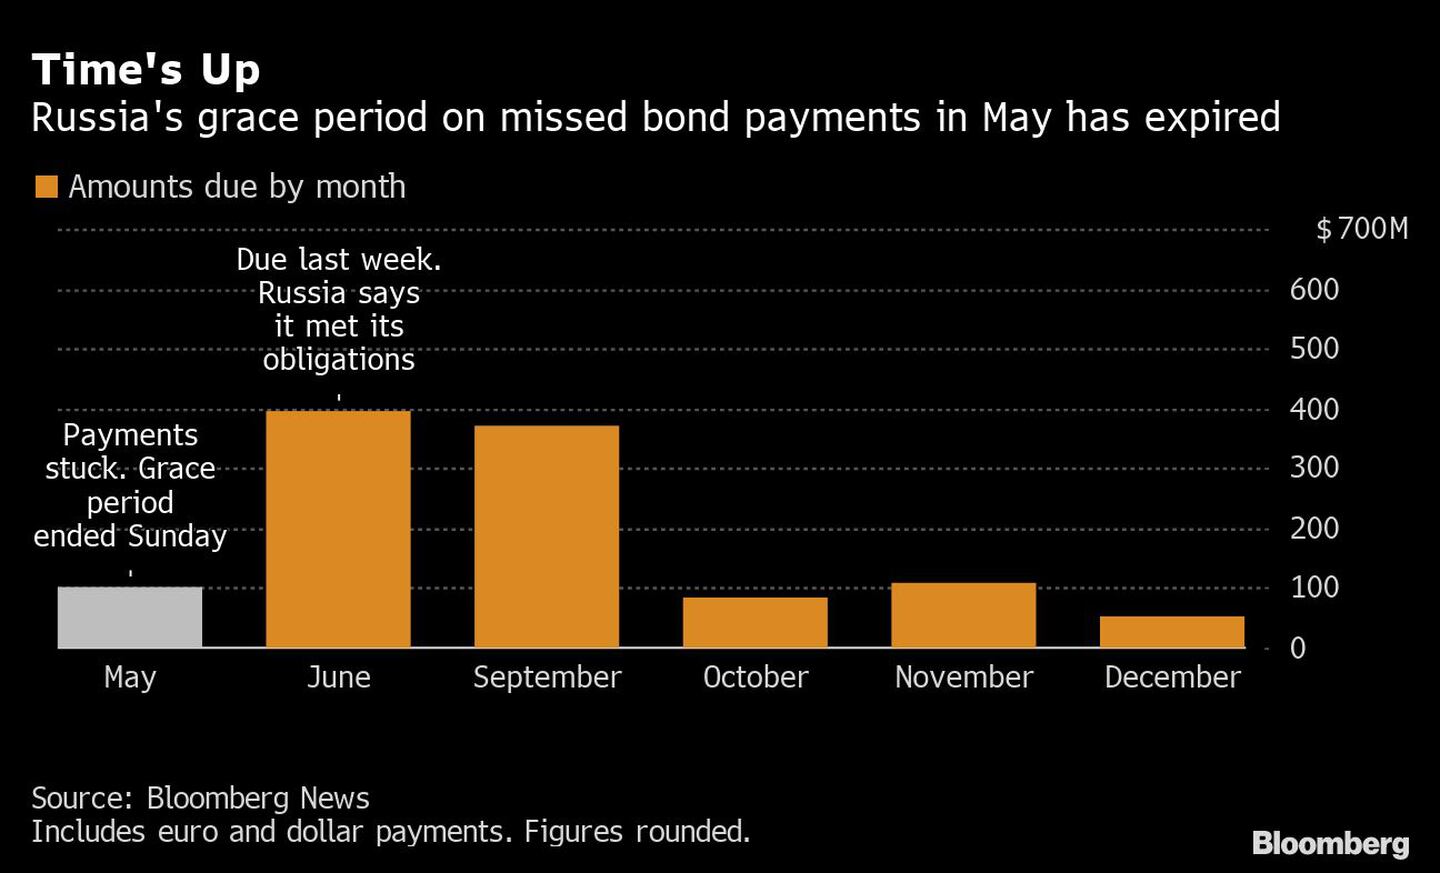 Time's Up | Russia's grace period on missed bond payments in May has expireddfd